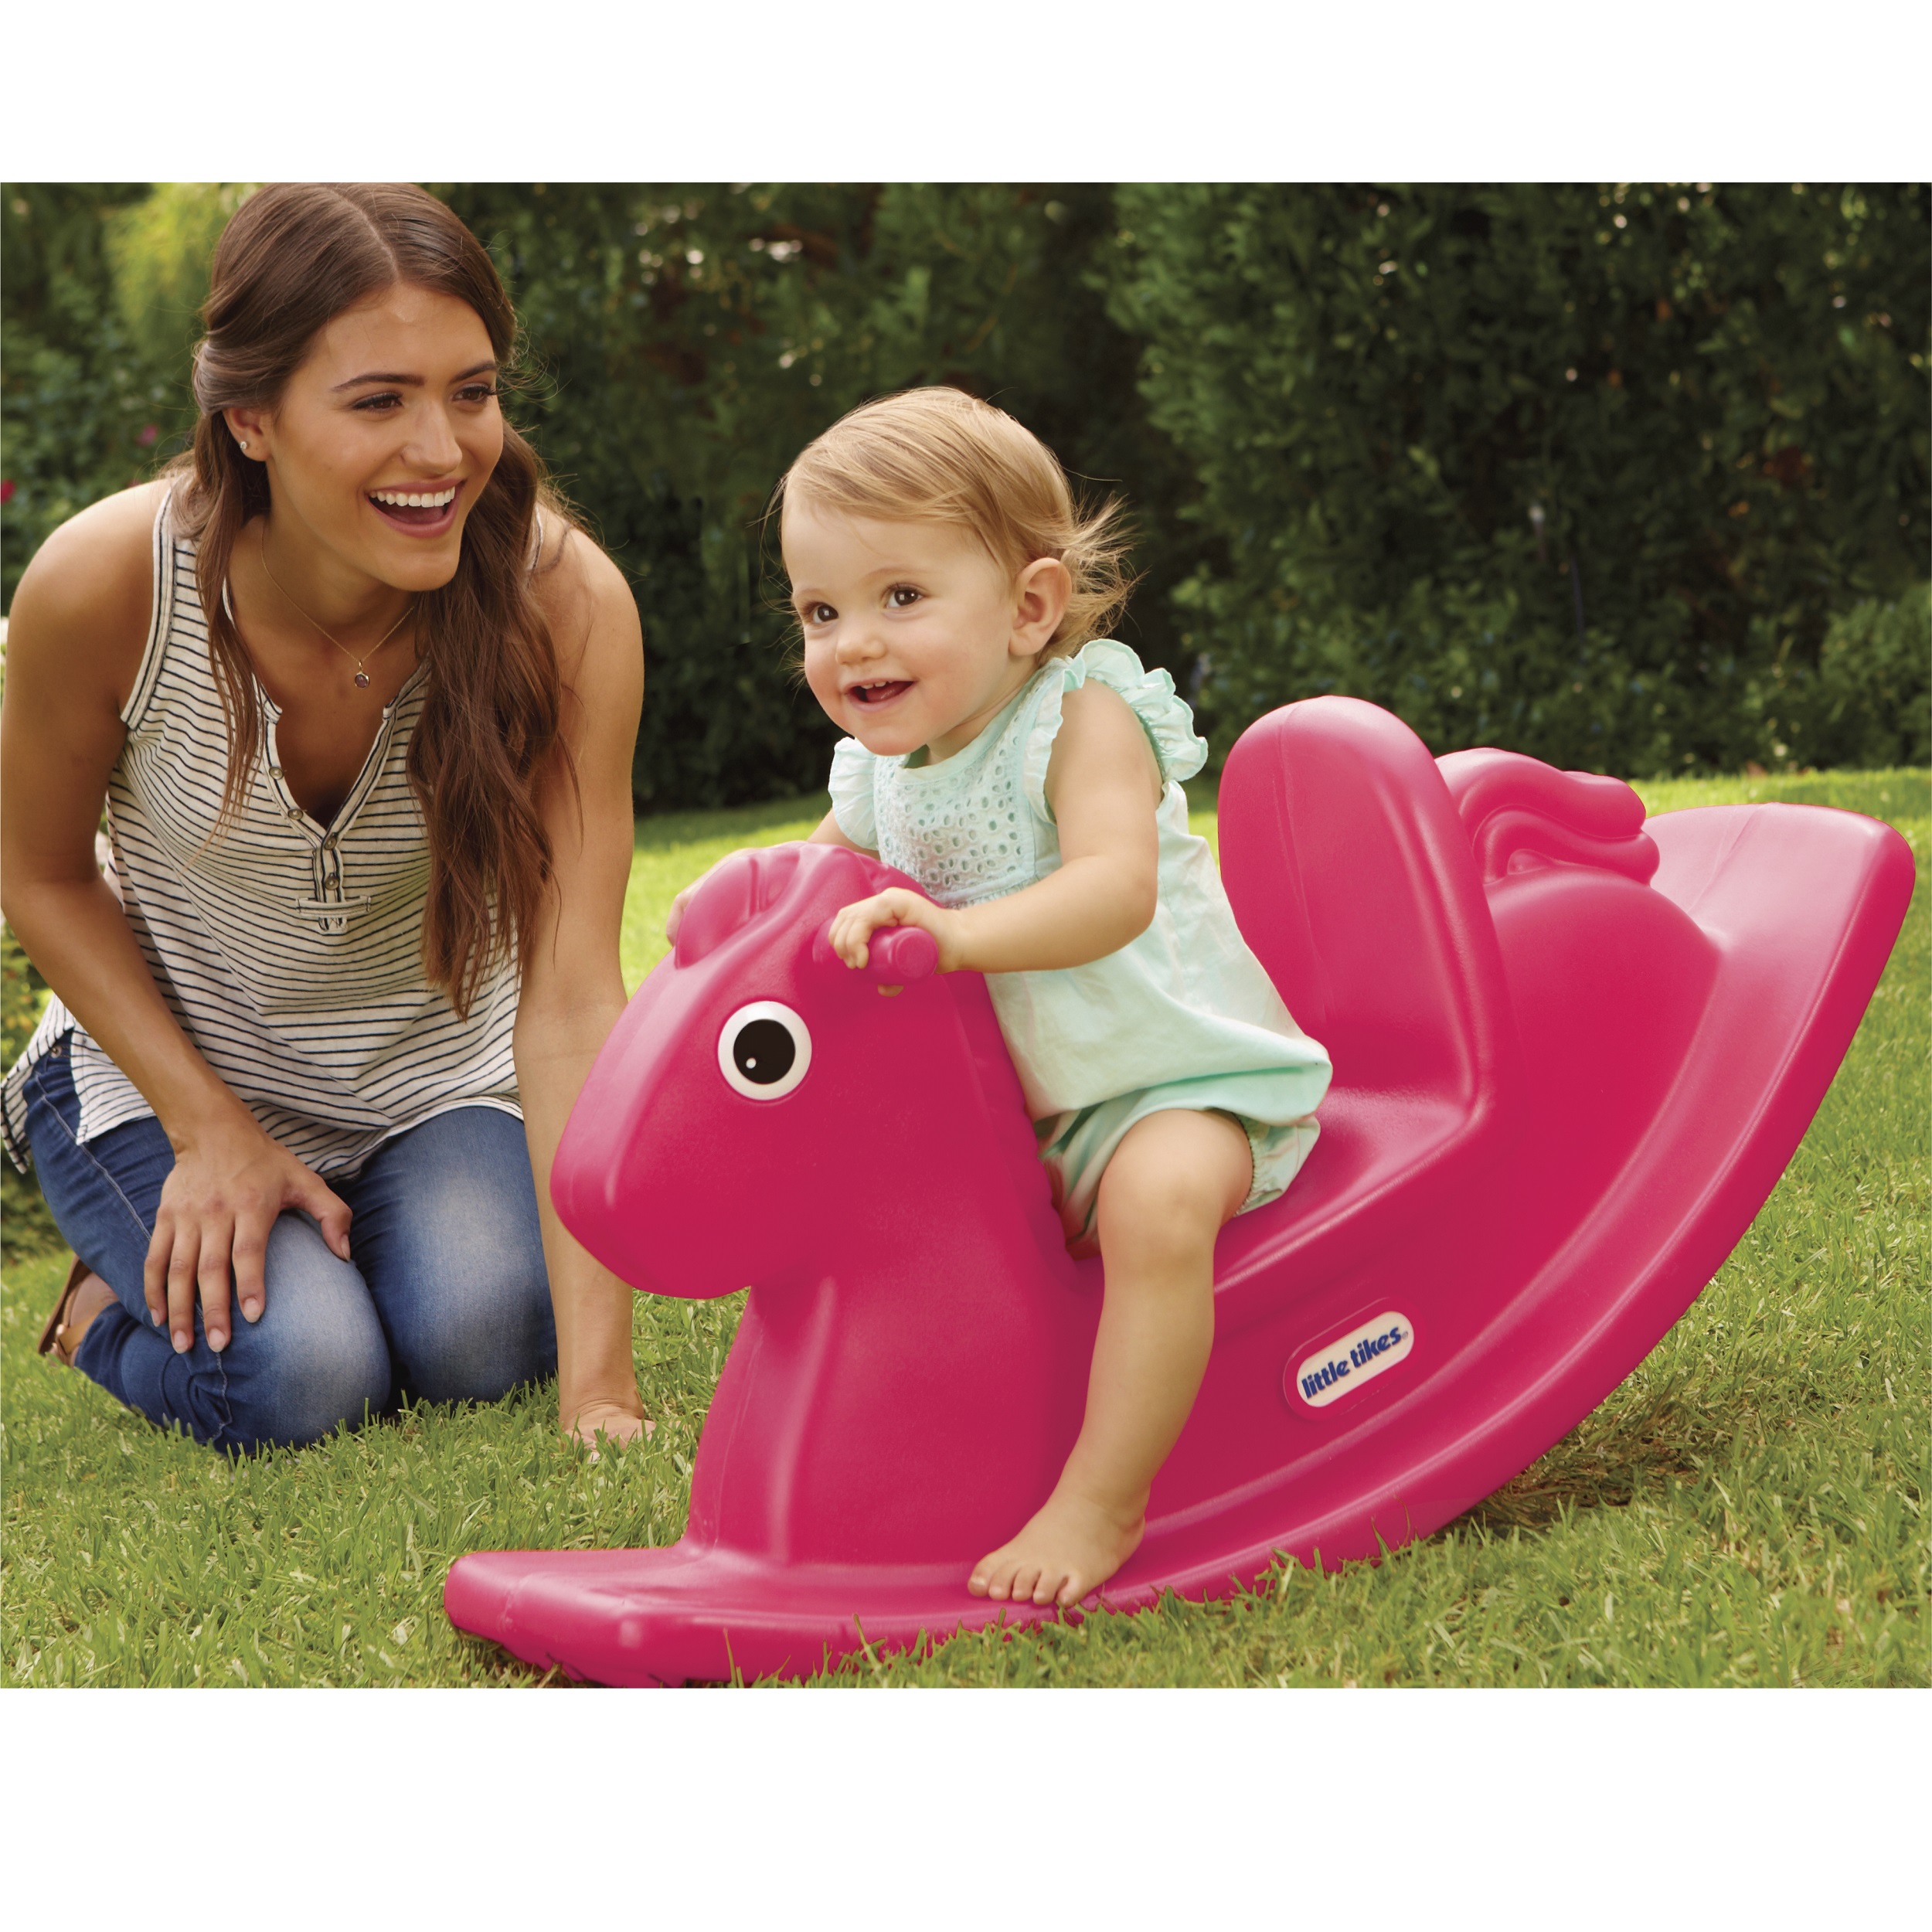 Little Tikes Kids Rocking Horse in Magenta, Classic Indoor Outdoor Toddler Ride-on Toy, Kids Boys Girls Ages 12 Months to 3 Years - image 4 of 5